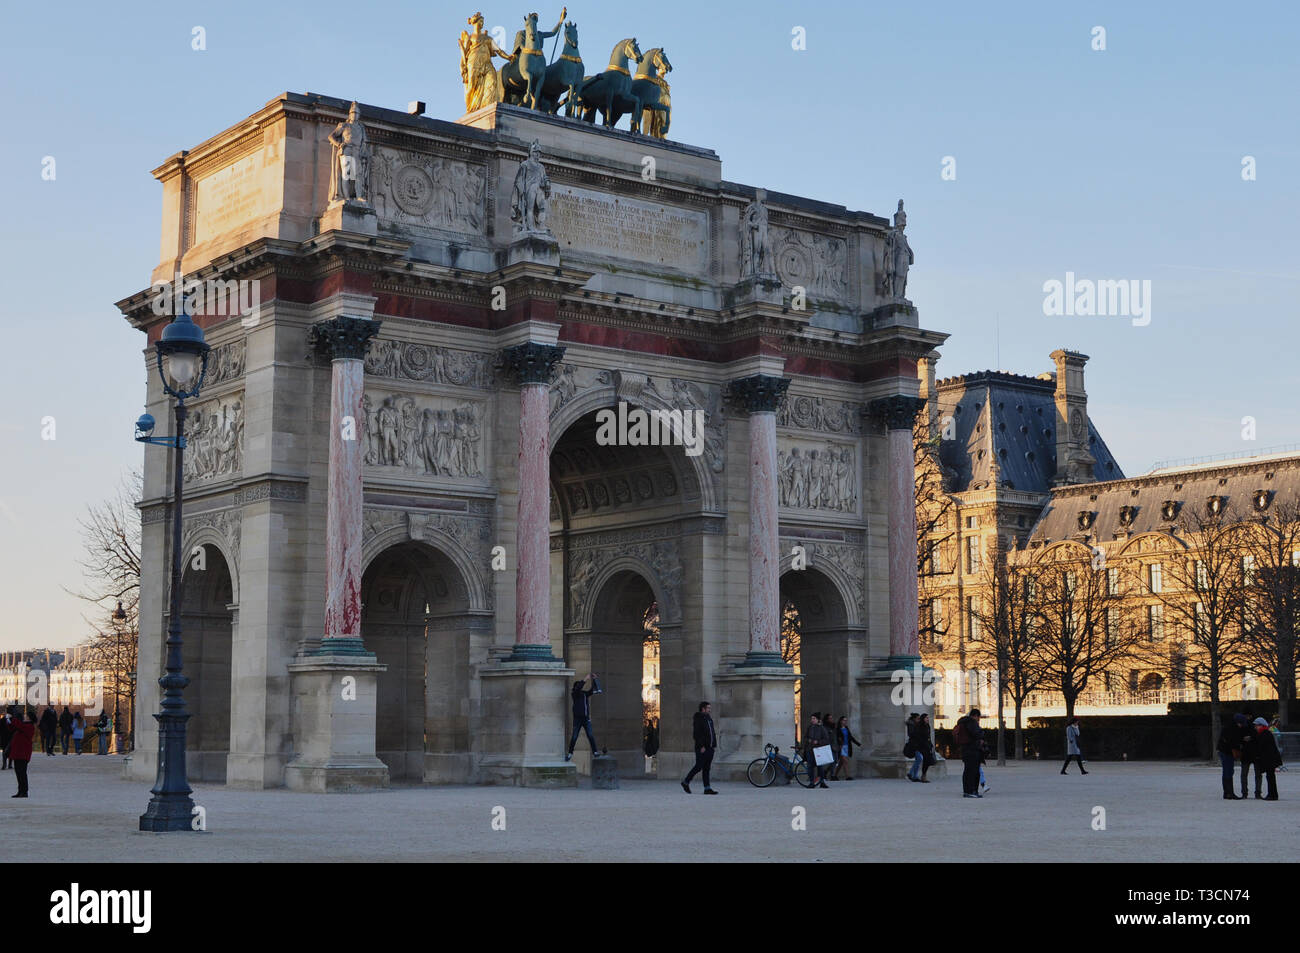 Paris, France - 02/08/2015: View of the Louvre museum Stock Photo